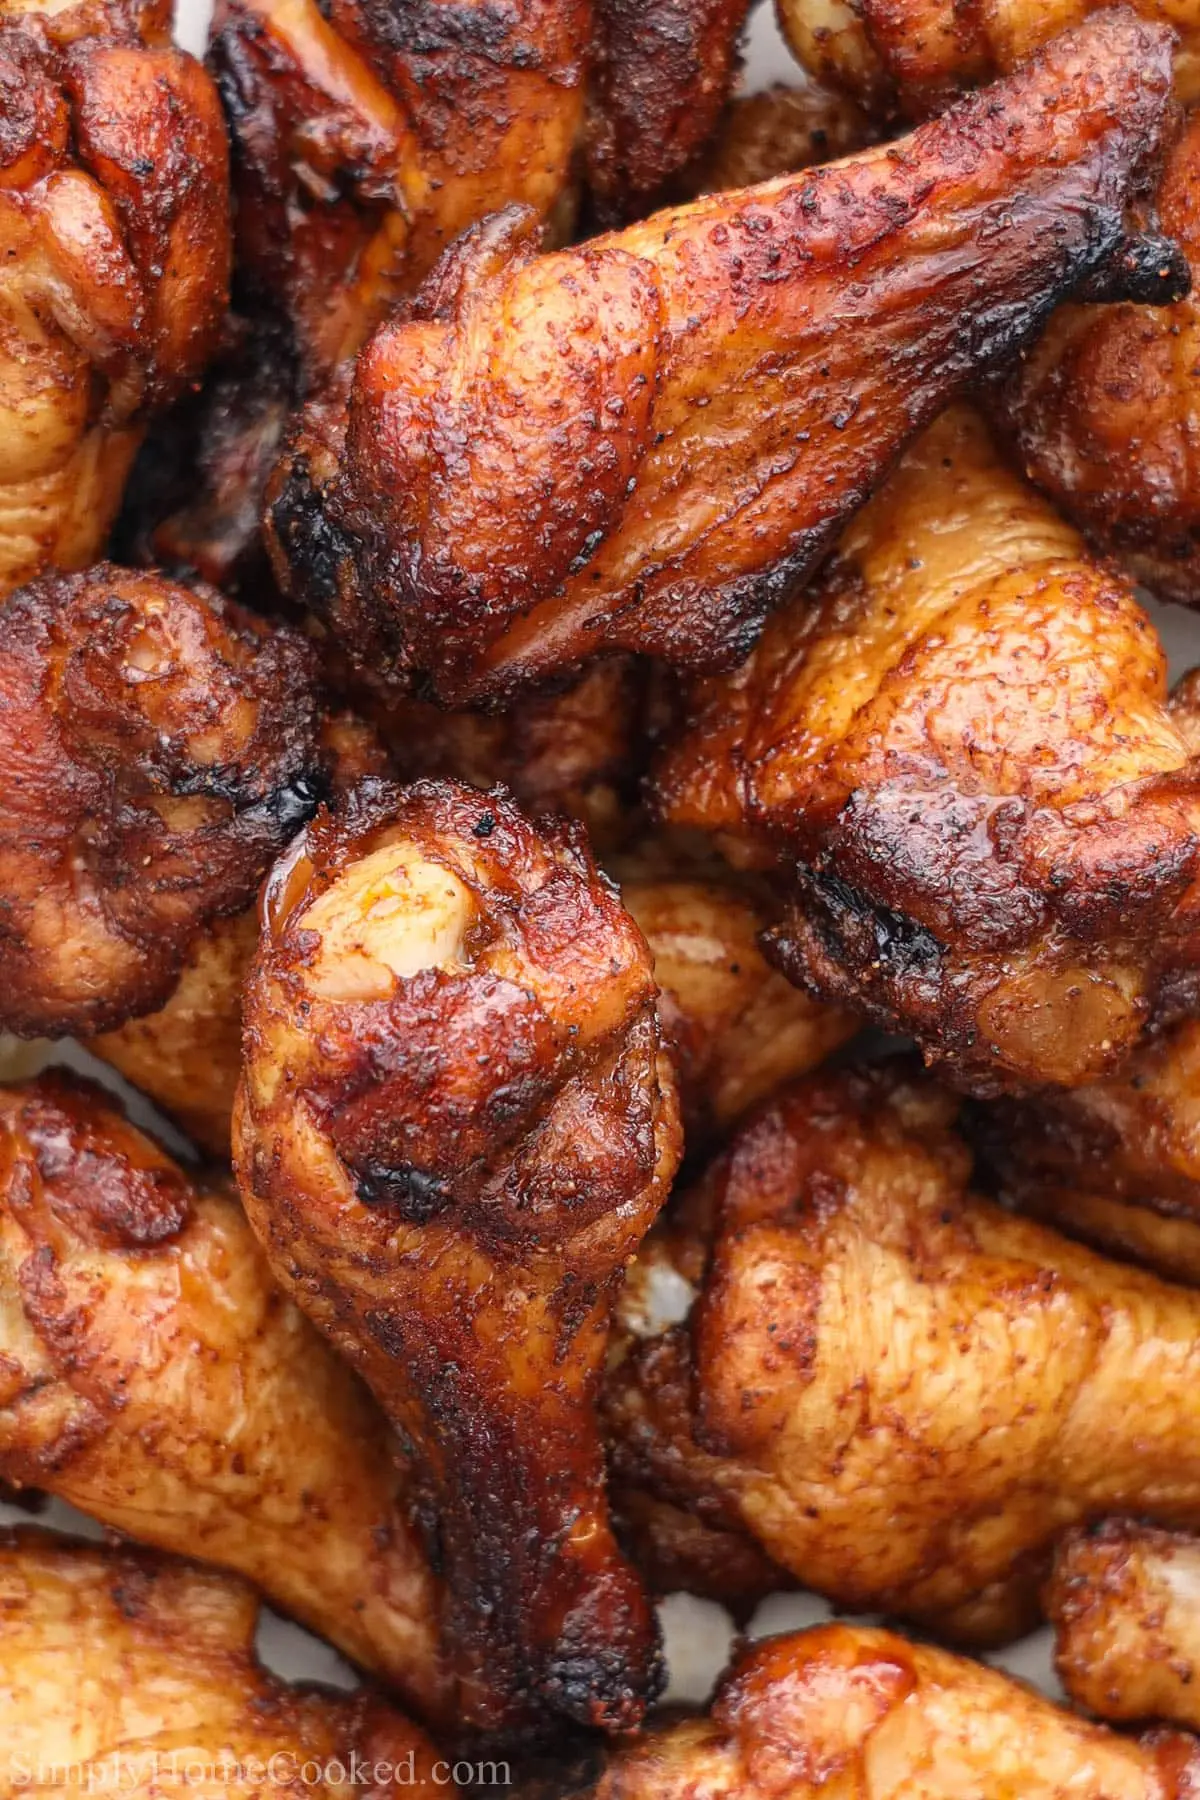 smoked chicken wings cook time - Can you overcook smoked wings